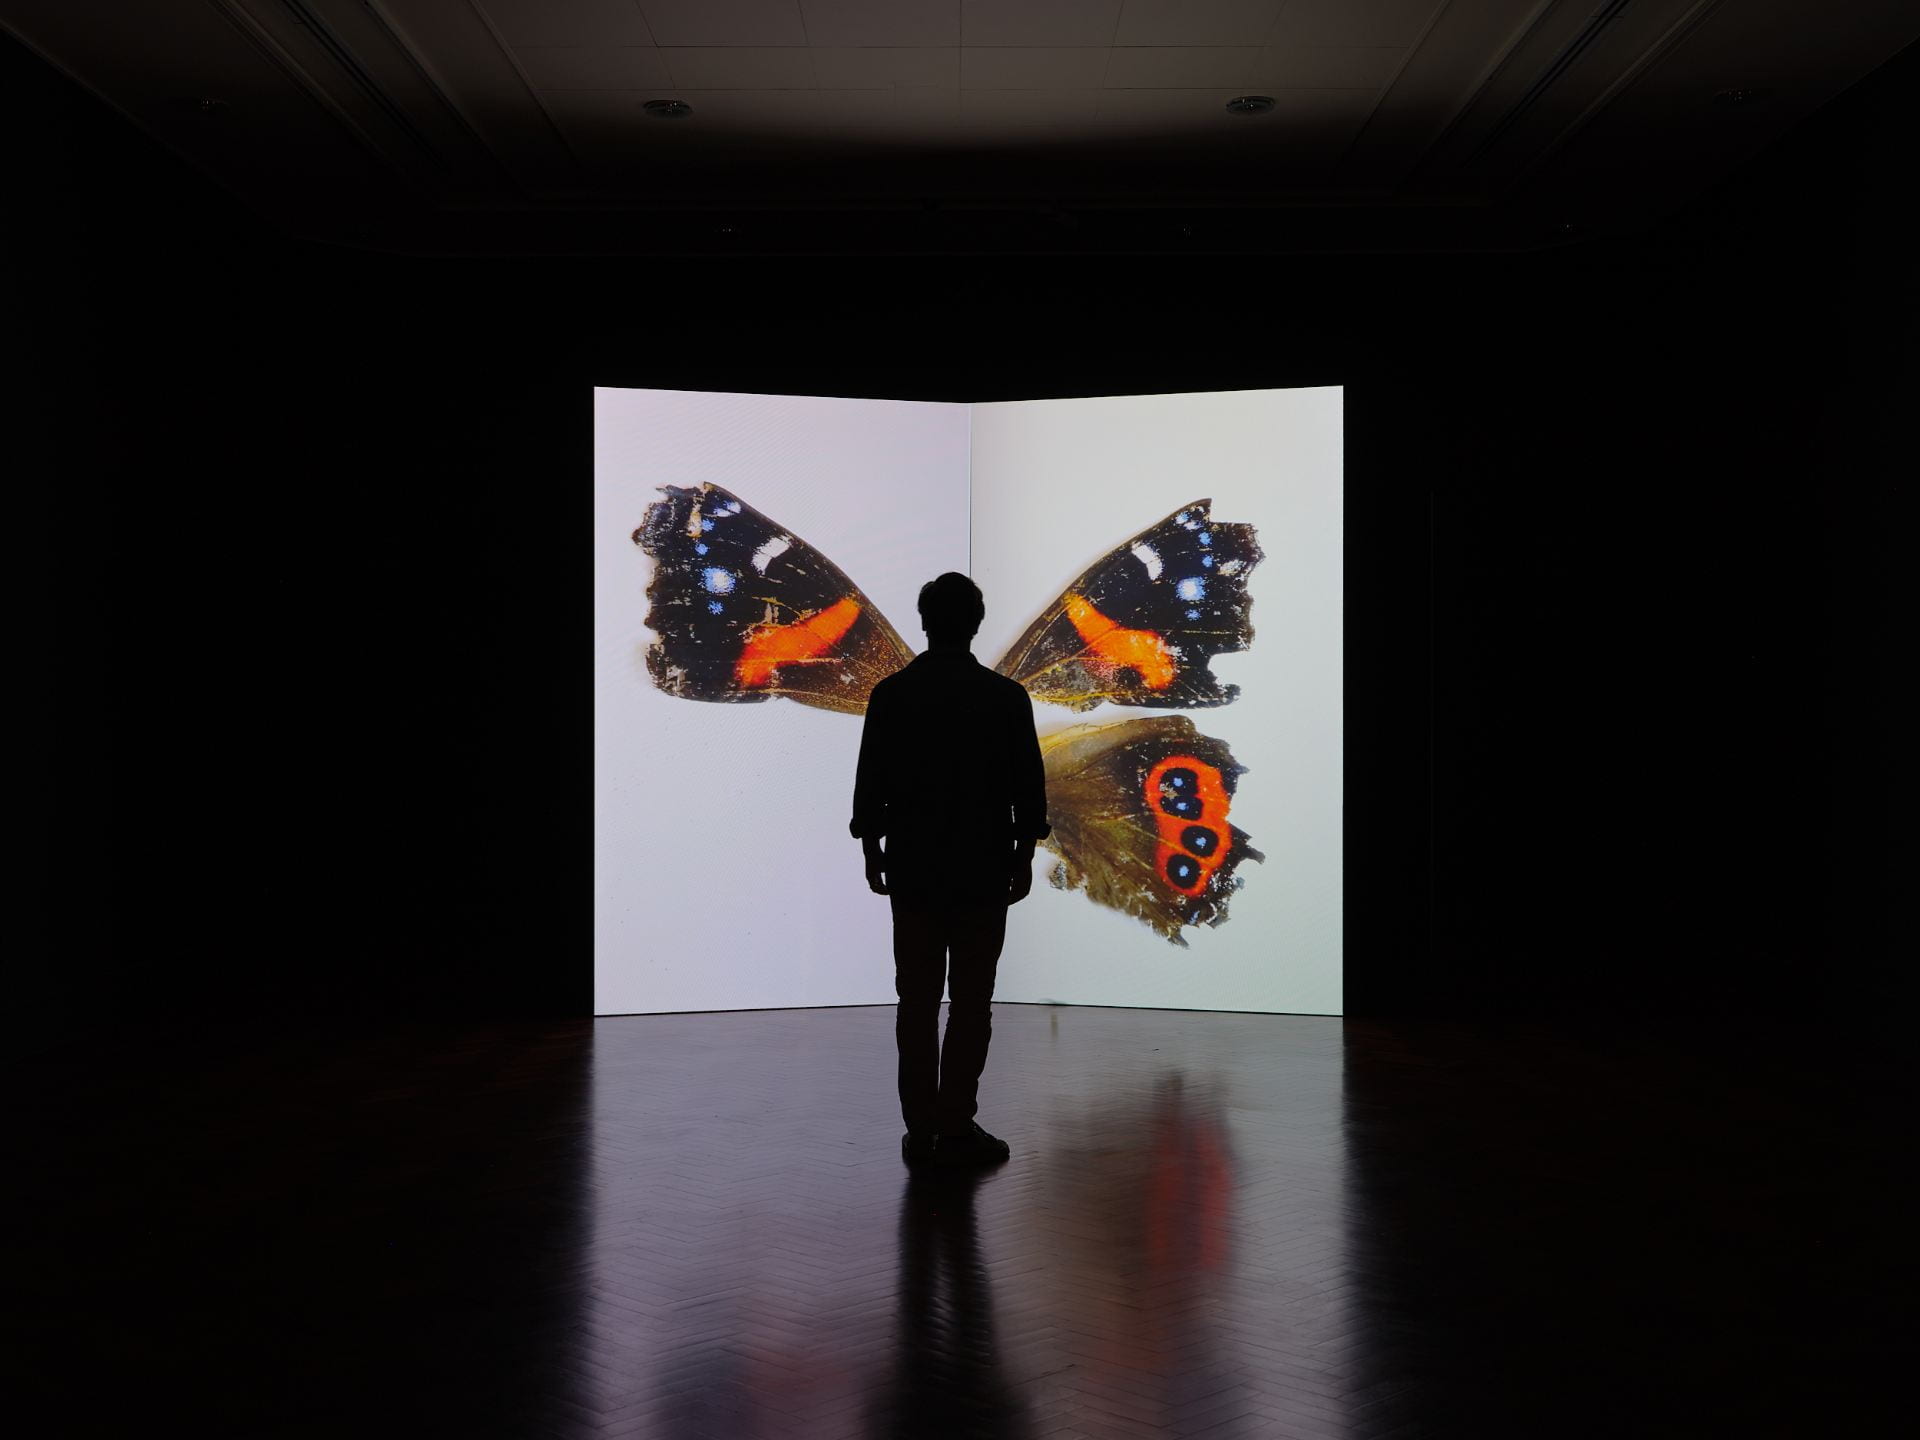 A film work is projected onto a structure shaped like an open book. A man stands silhouetted in front of the film. The film shows the red and black wings of a native butterfly, laying preserved on a white surface.